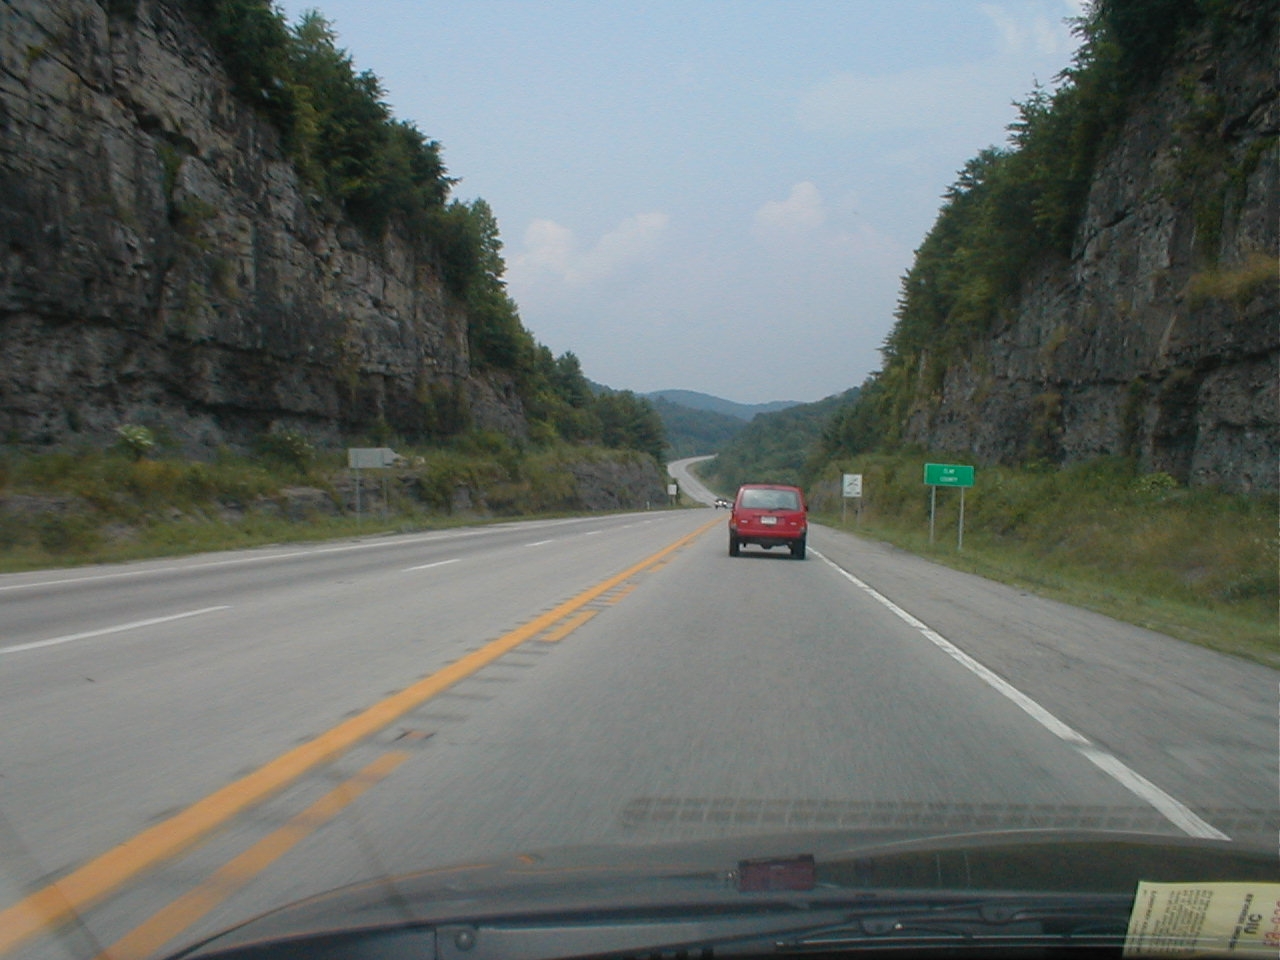 Entering Clay County through a large rock cut.